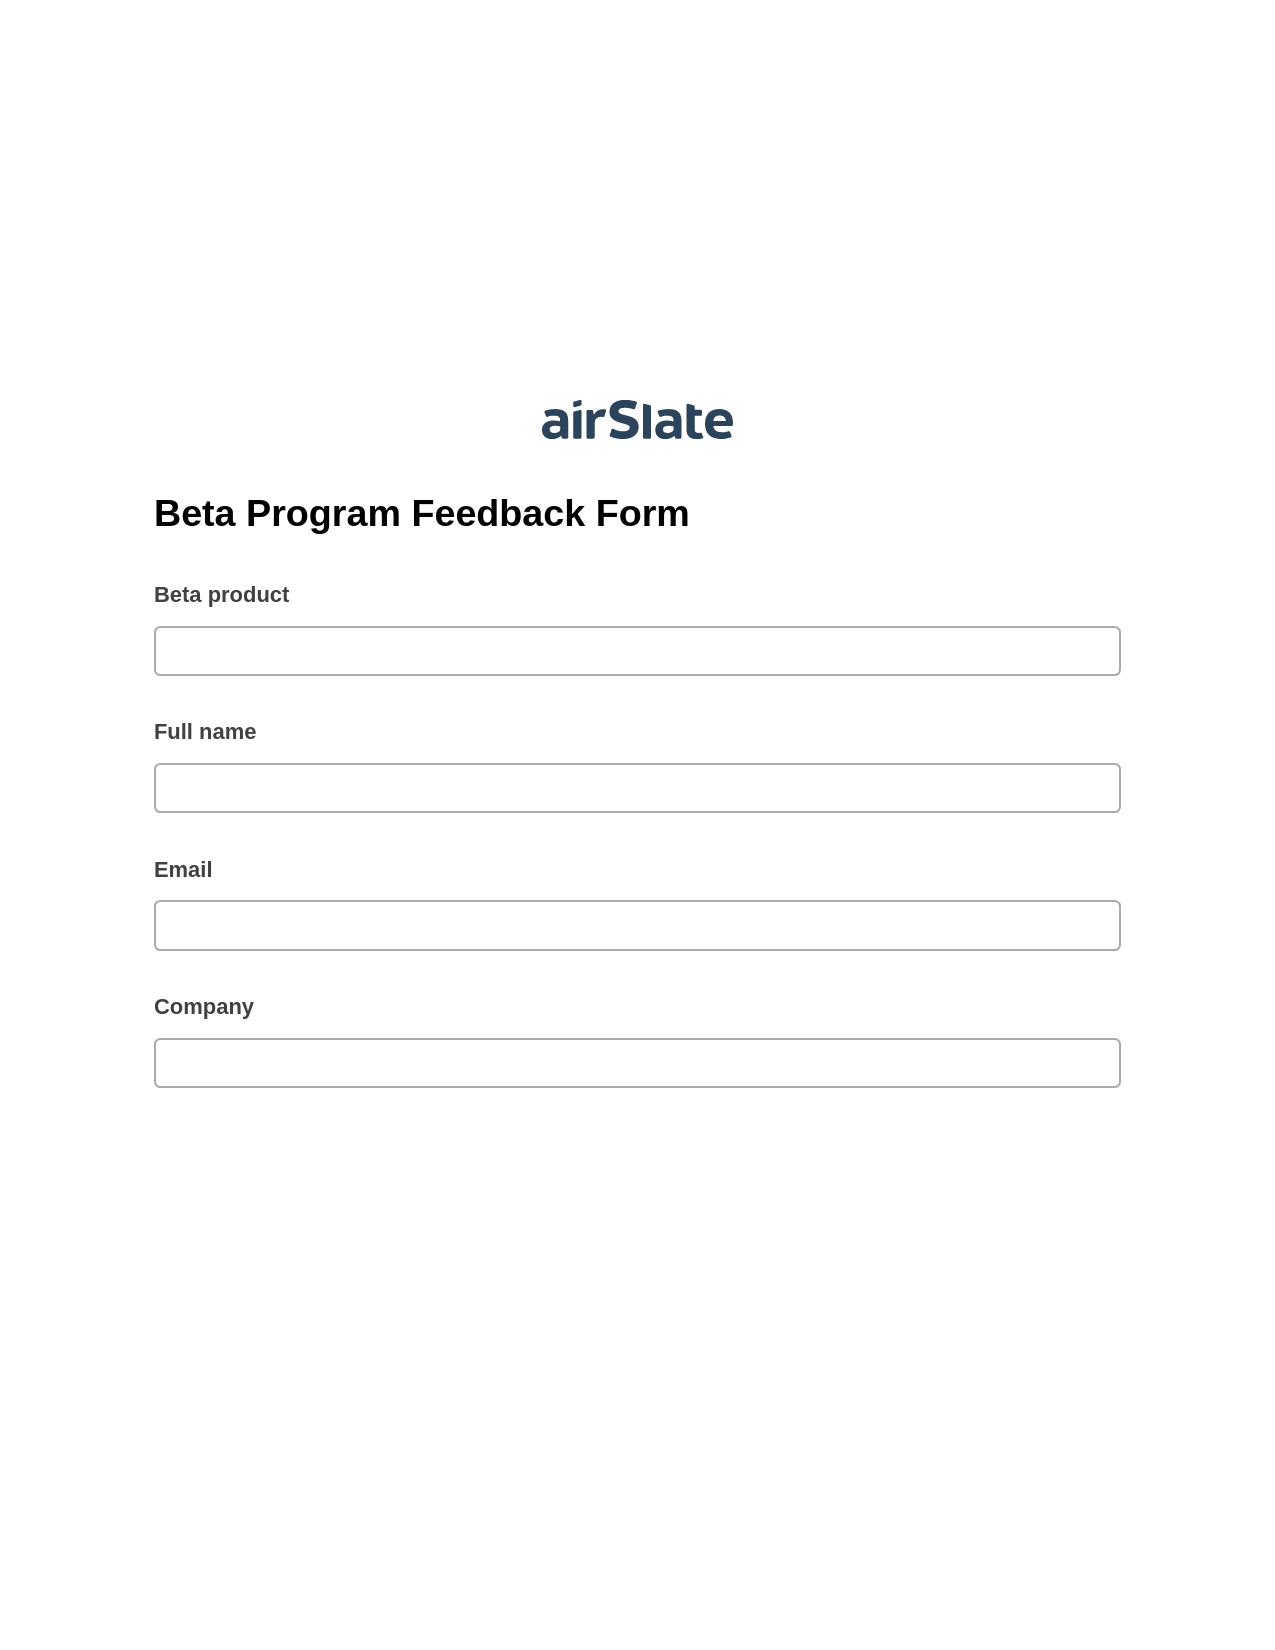 Multirole Beta Program Feedback Form Pre-fill from Salesforce Records with SOQL Bot, Export to MS Dynamics 365 Bot, Export to Excel 365 Bot